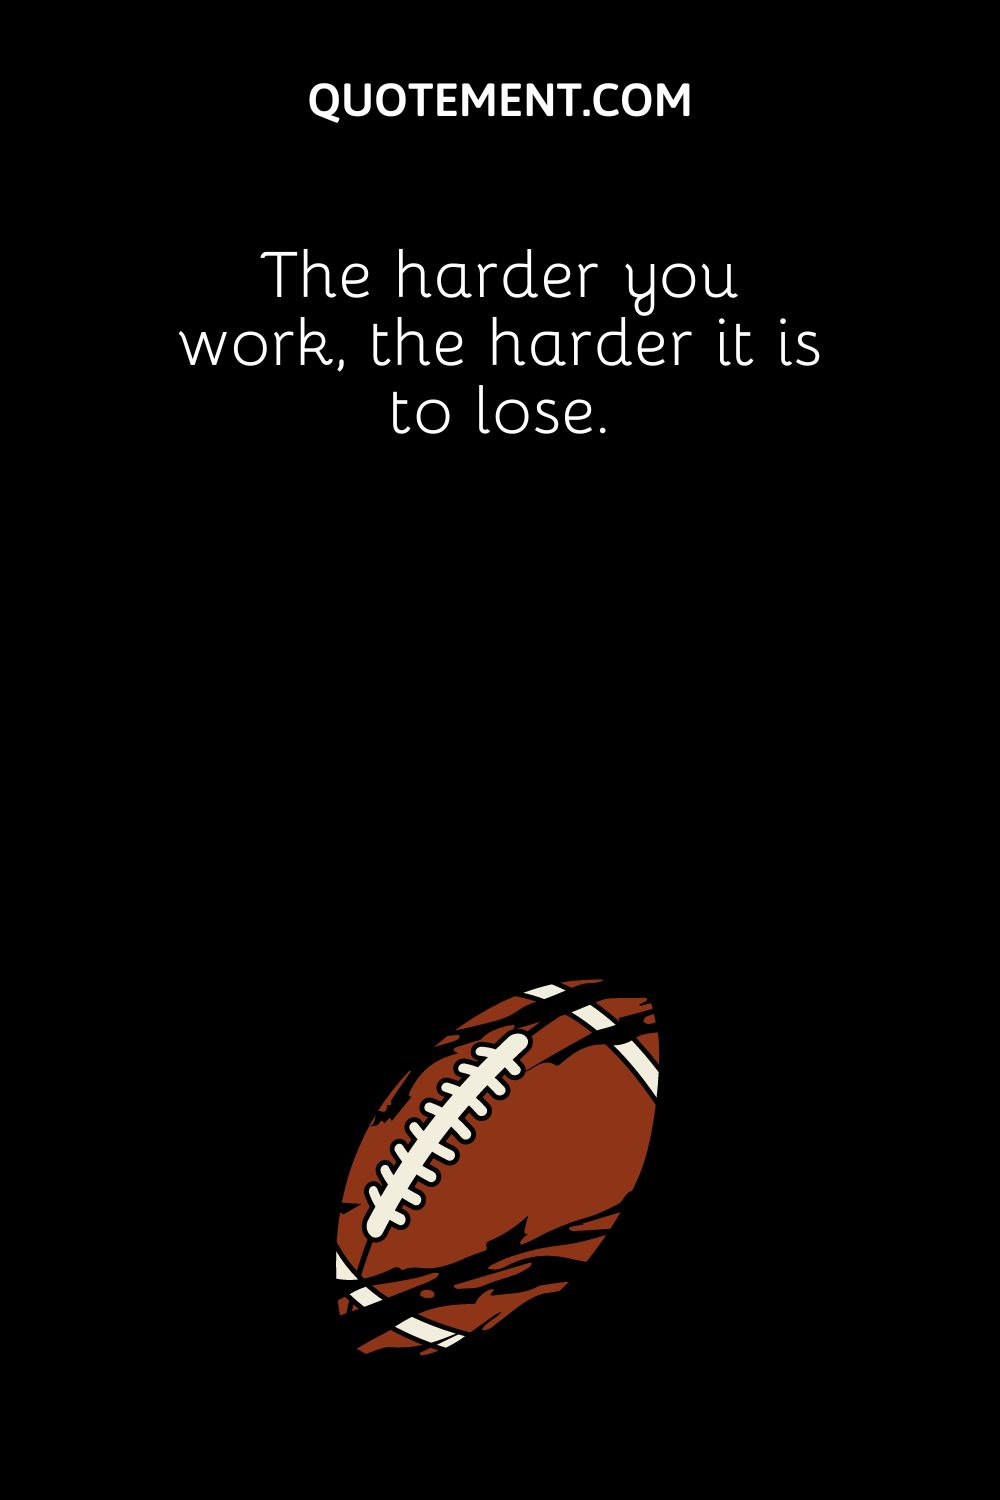 The harder you work, the harder it is to lose